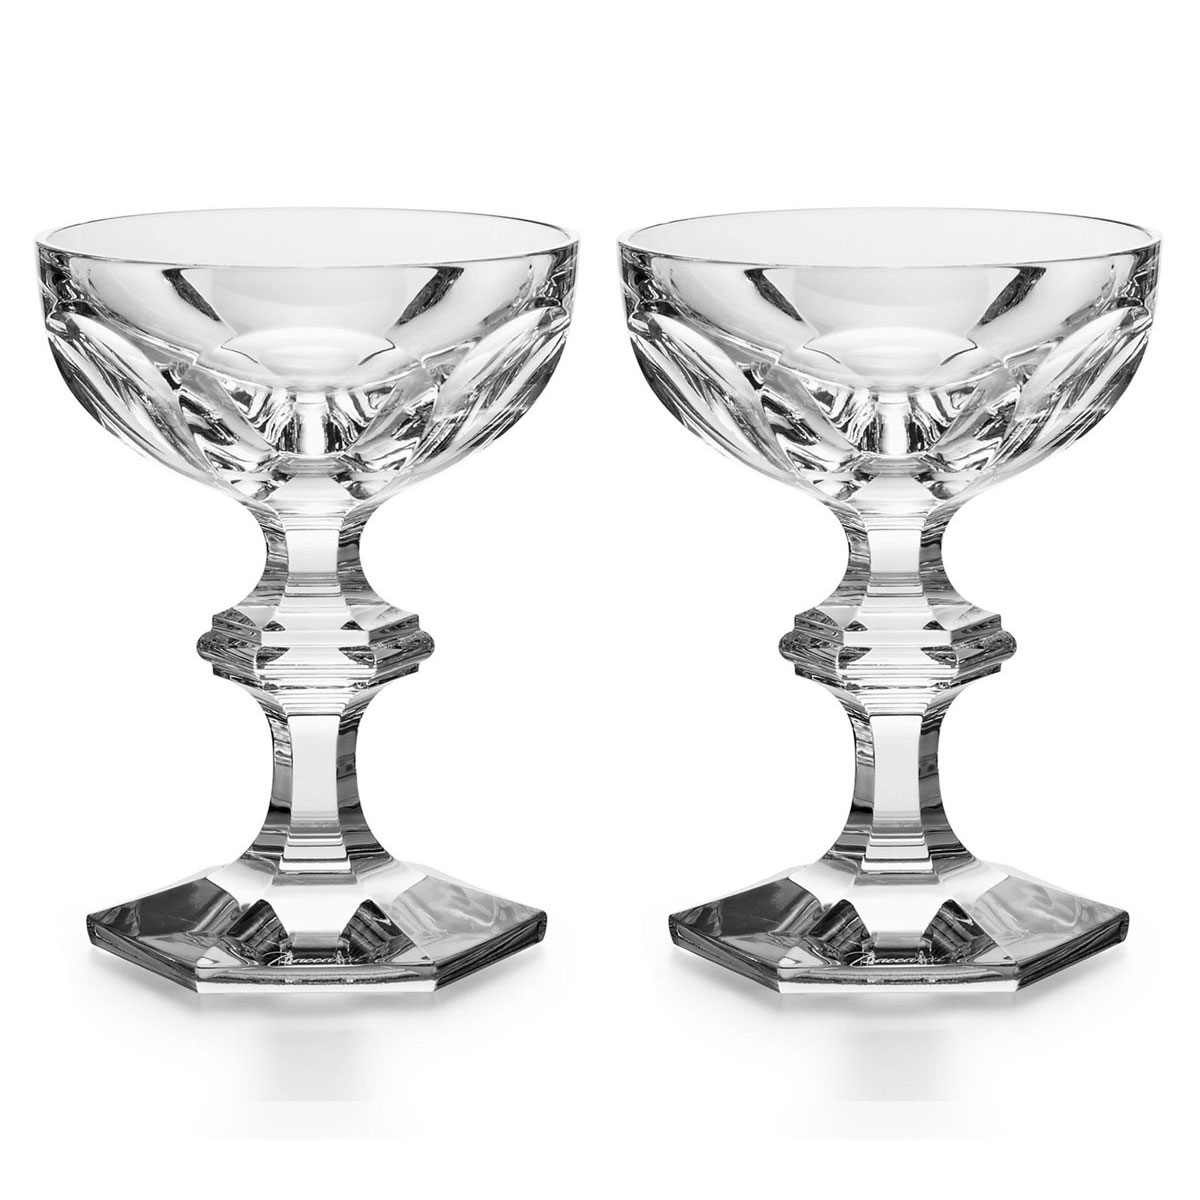 Baccarat Crystal, Harcourt 1841 Cocktail Saucer Champagne Coupe, Pair